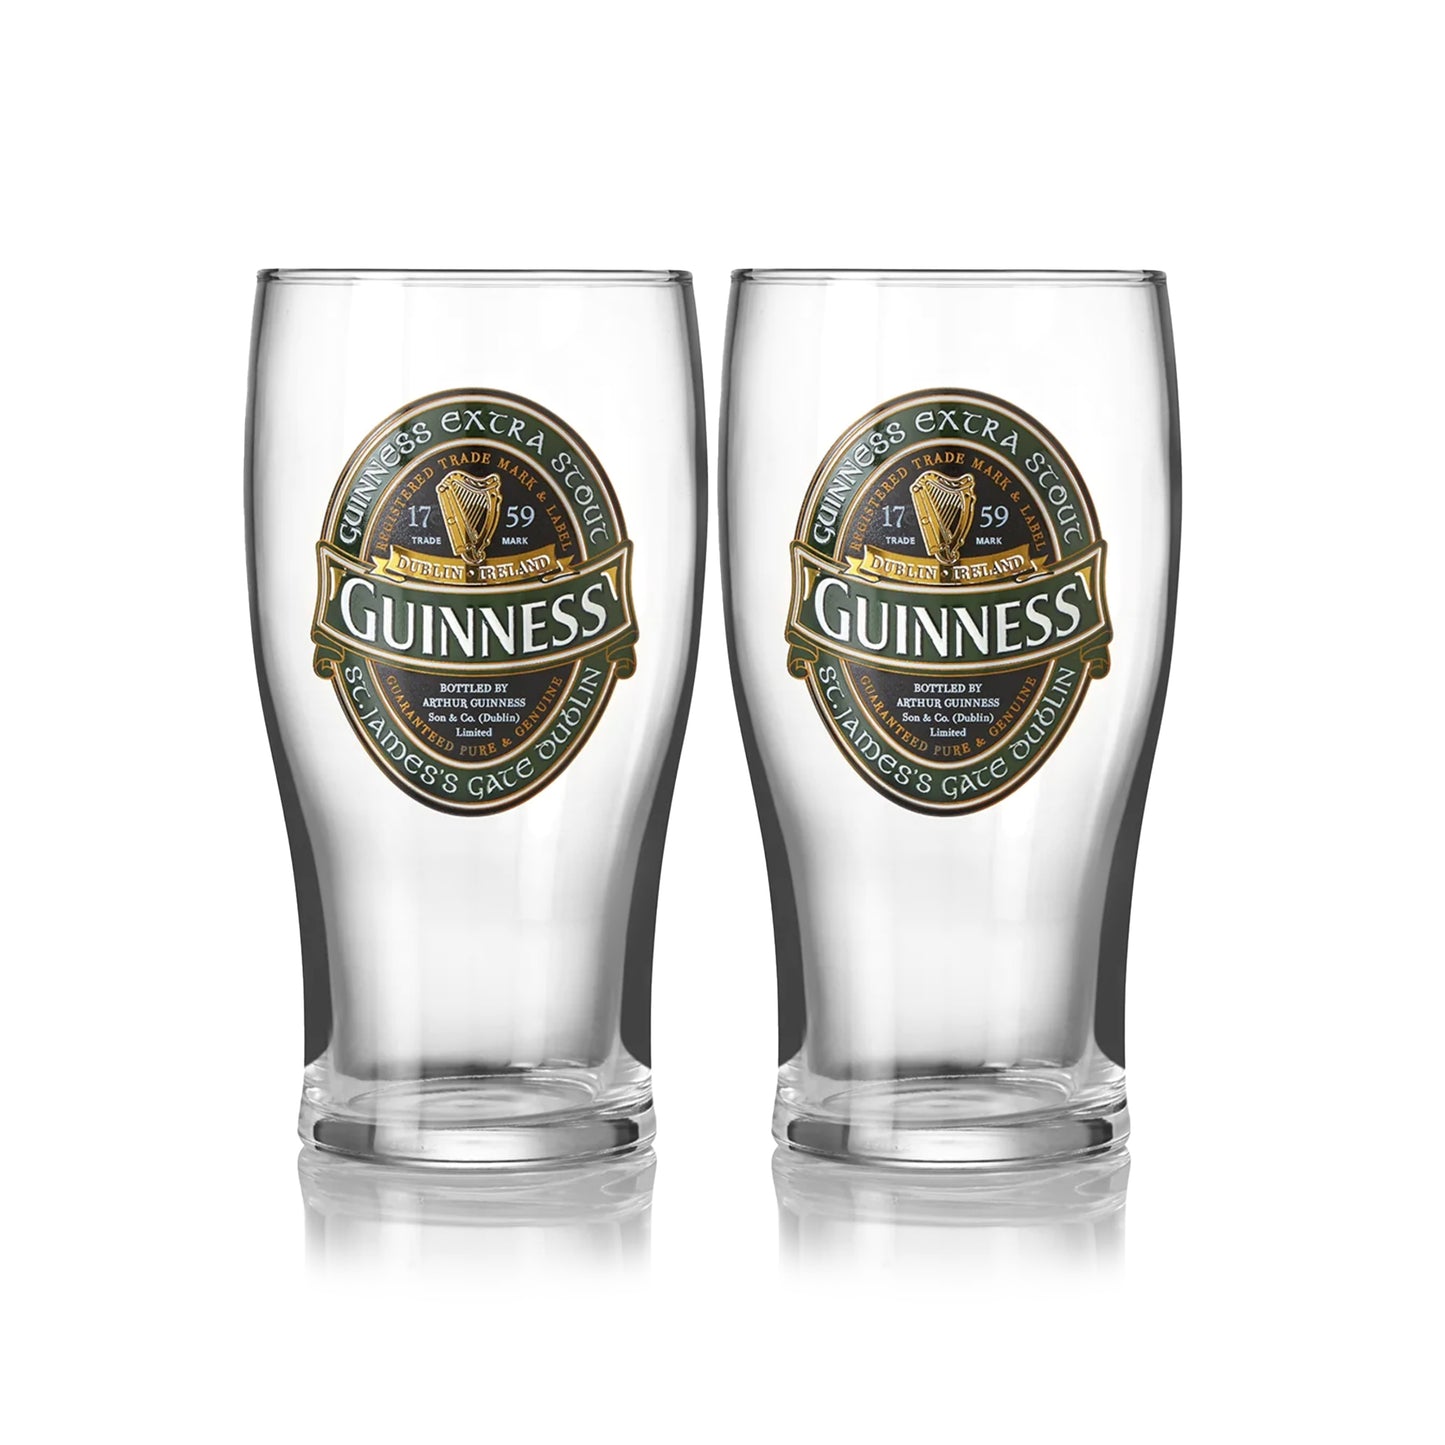 Two Guinness Ireland Collection Pint Glasses on a white background.